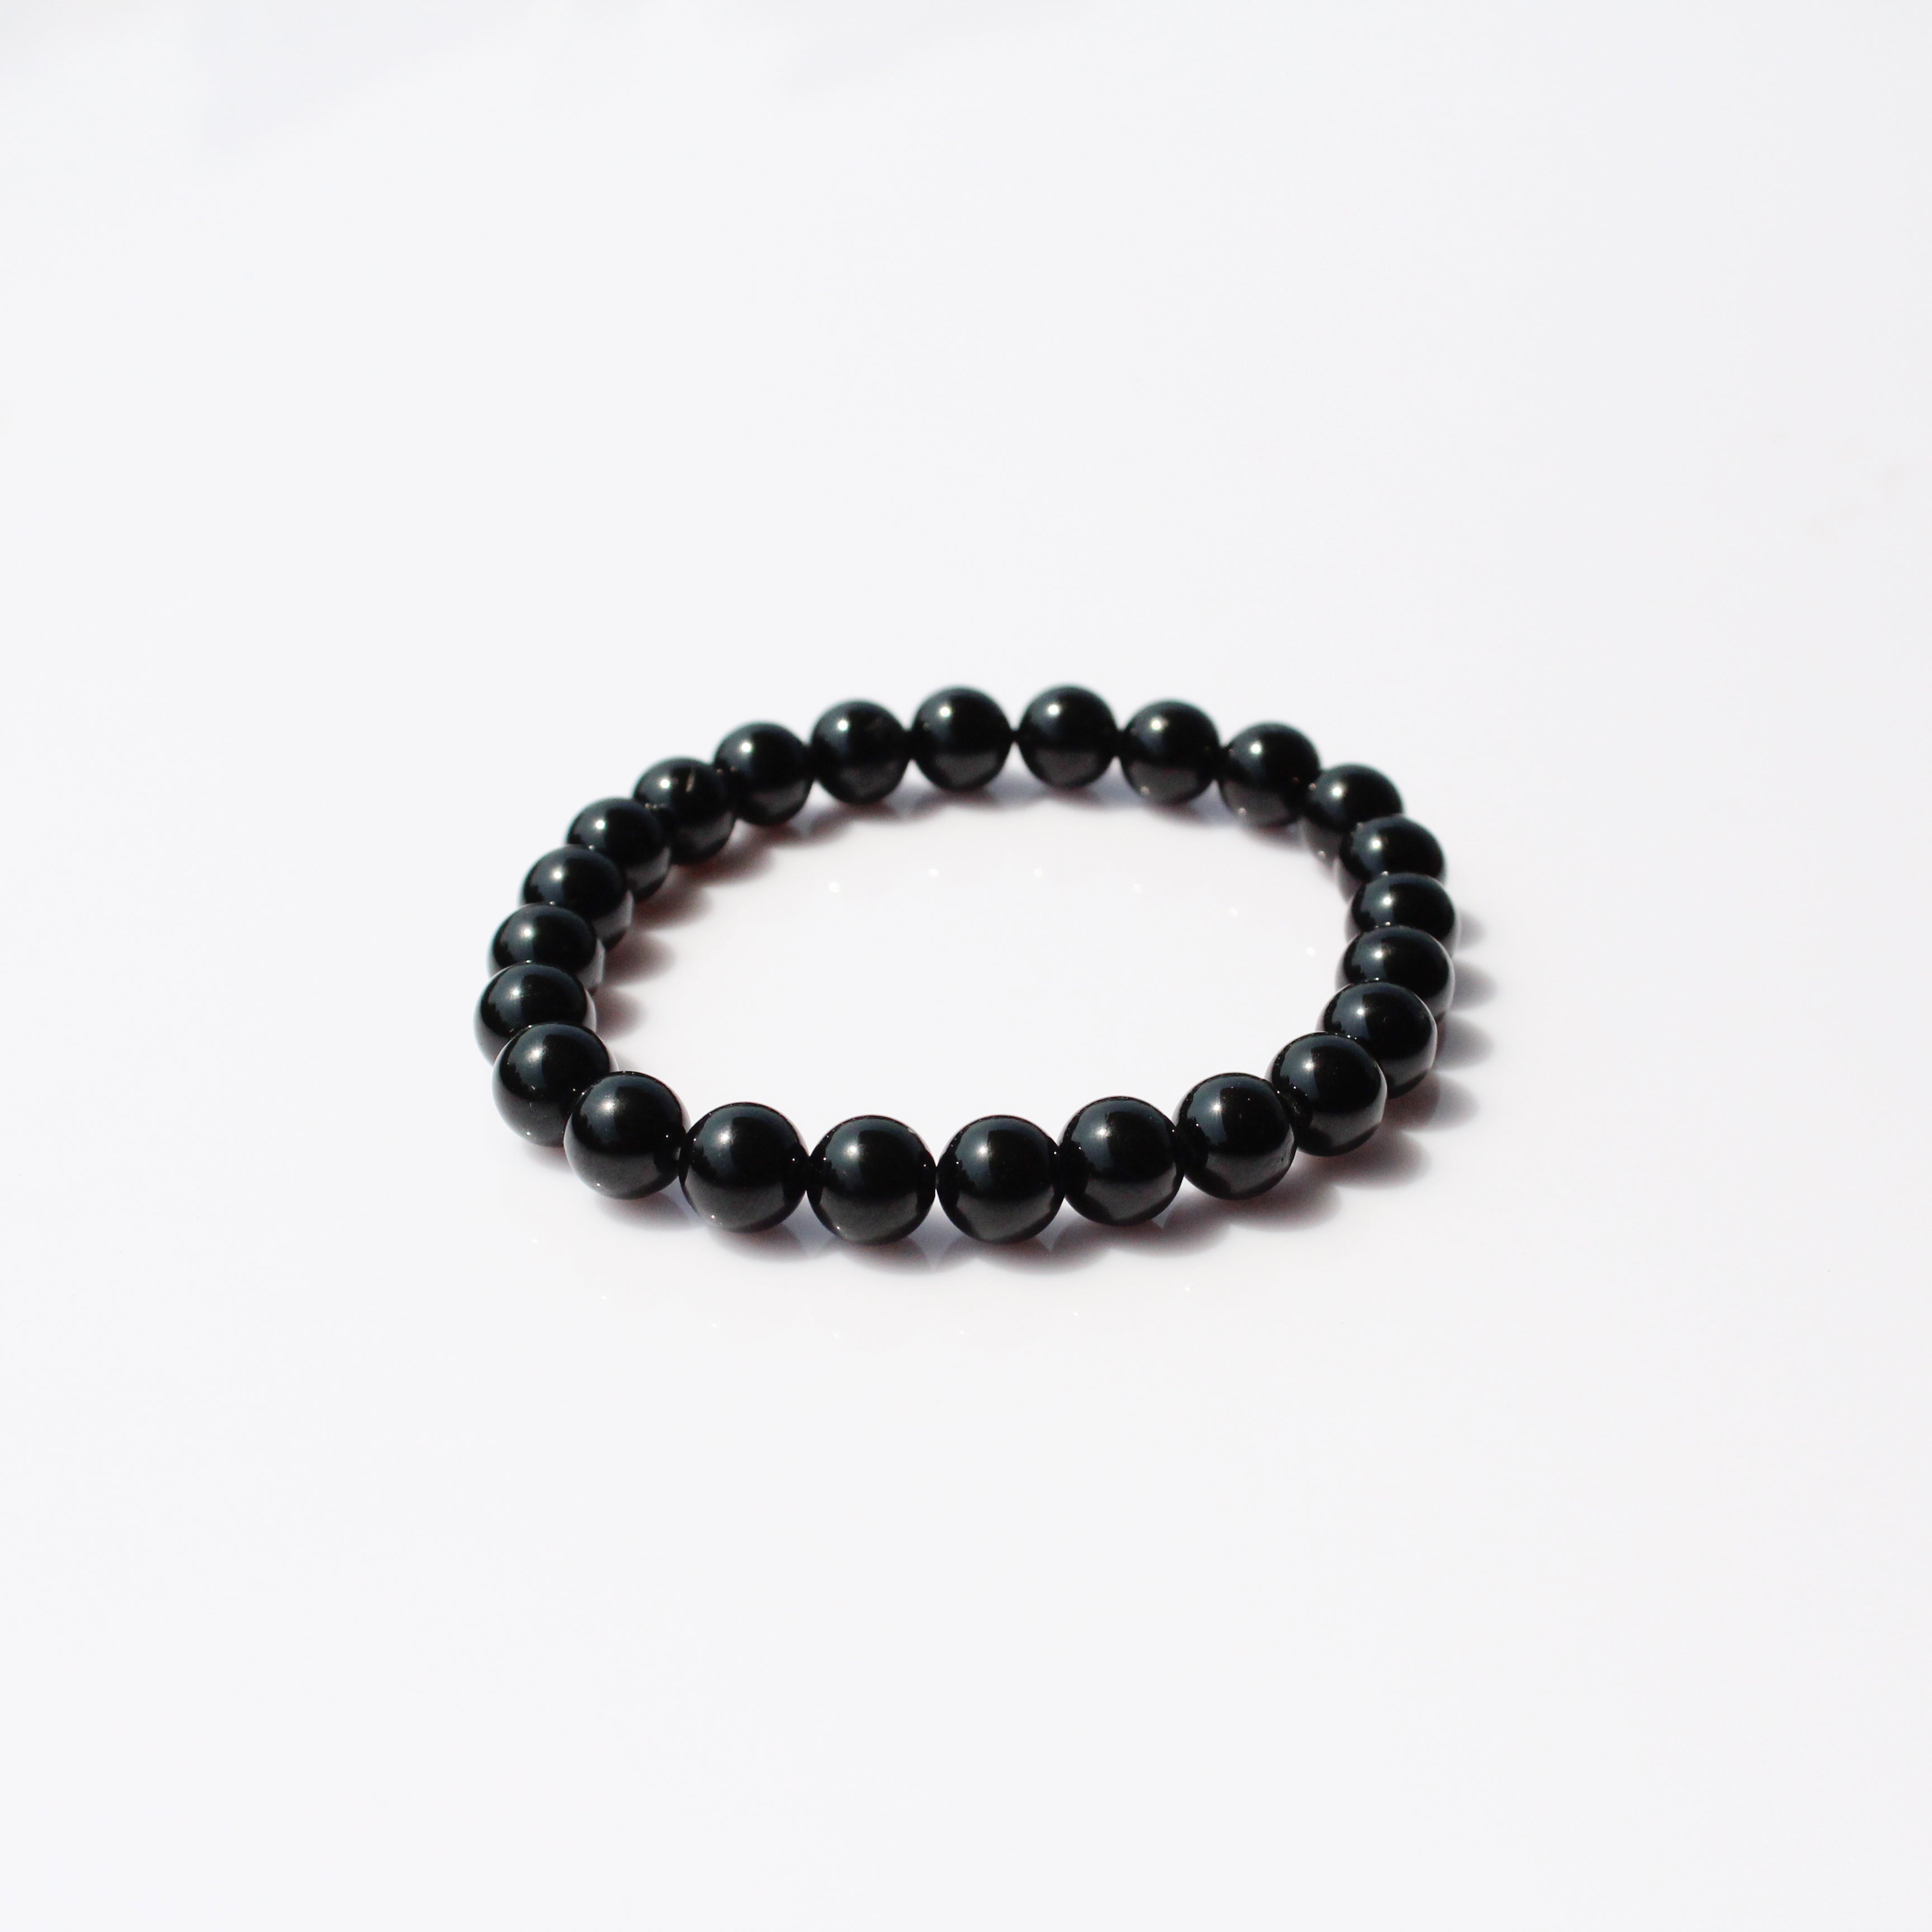 Buy Black Tourmaline Bracelet With Raw Tektite Crystal Healing Natural  Stone Protection, Grounding, Stability, Psychic Attack Online in India -  Etsy